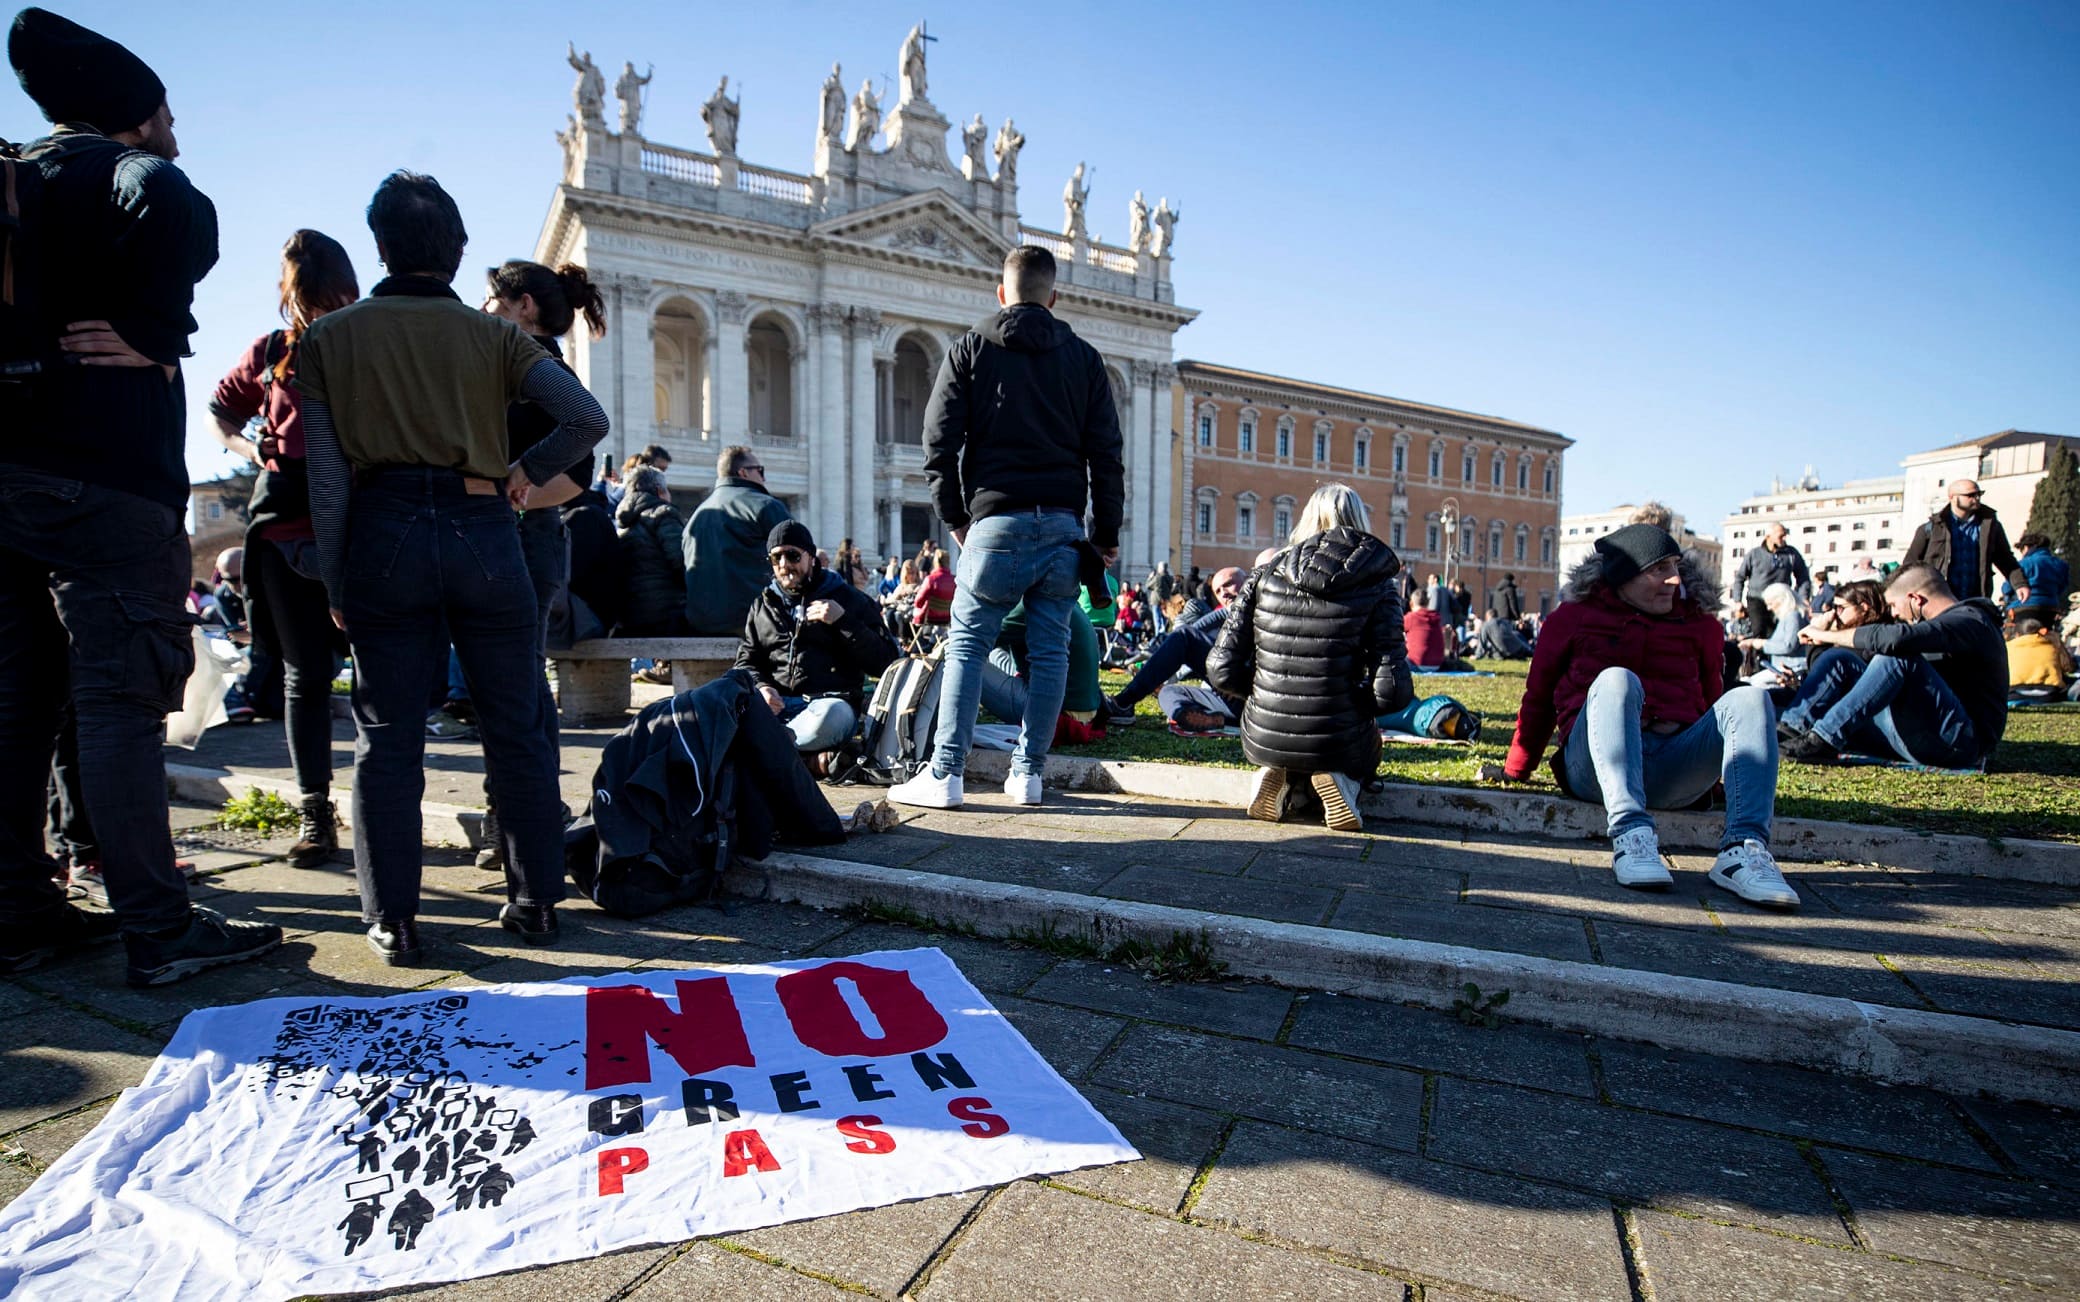 People gather during the 'No Vax and No Green Pass' protest at San Giovanni square, in Rome, Italy, 15 January 2022. In Italy it is now necessary to have the so-called Super Green Pass, which shows that a person is vaccinated for COVID-19 or has recovered from it on the last six months, to access bars, restaurants, hotels and travel on buses, subways, trains, planes and ships. Furthermore, the government has also made the Super Green Pass obligatory for all over-50s as they are considered especially vulnerable if they contract the virus. 
ANSA/MASSIMO PERCOSSI